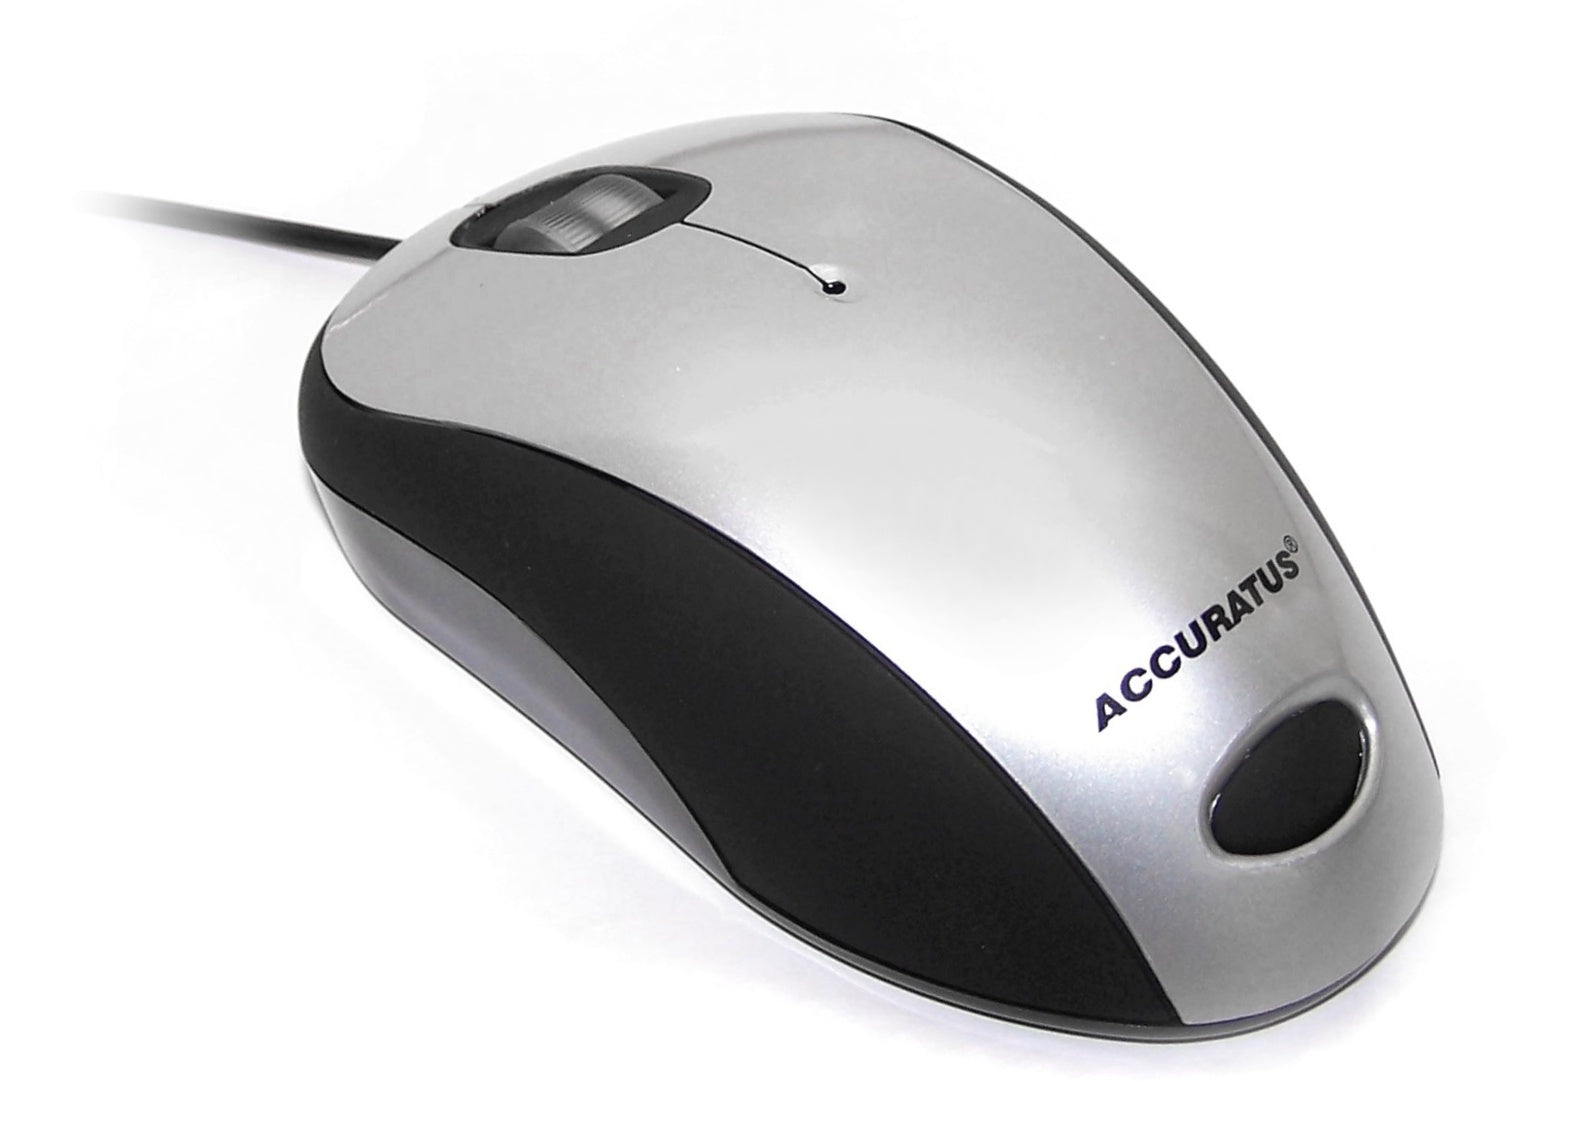 Accuratus Image - USB Full Size Glossy Finish Computer Mouse - Silver